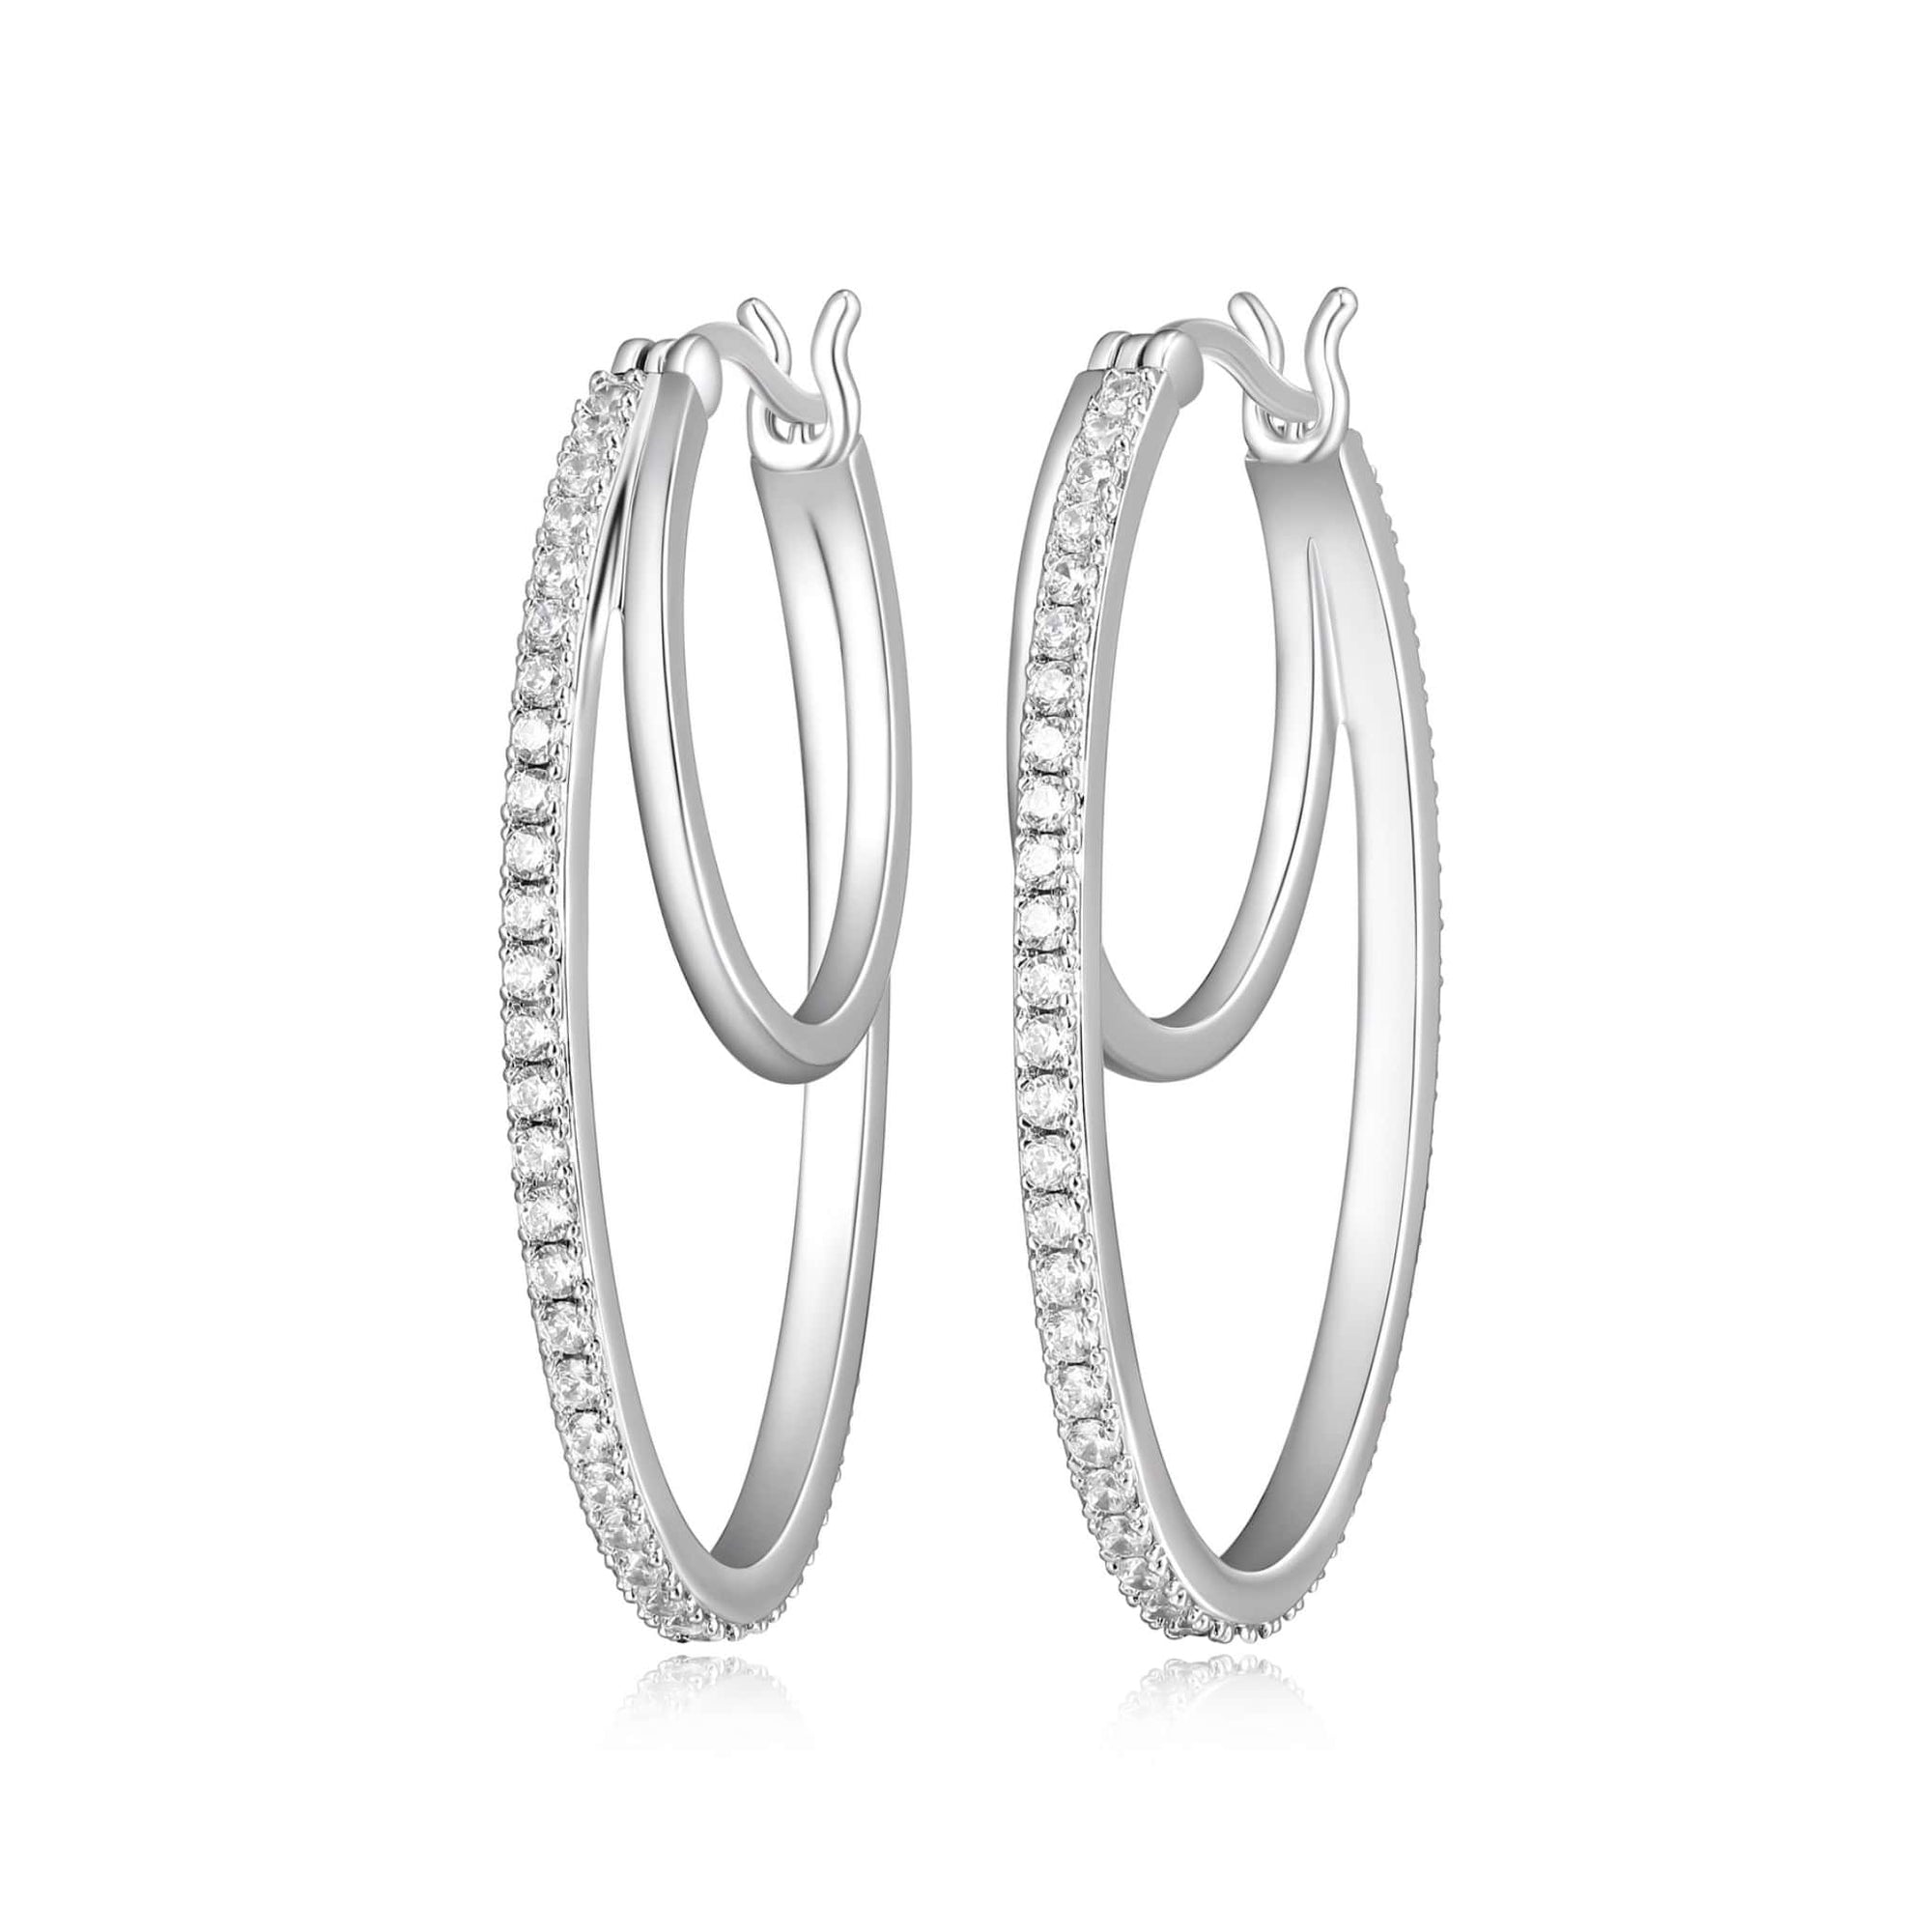 Oval Double Hoop Silver Earrings at Arman's Jewellers Kitchener